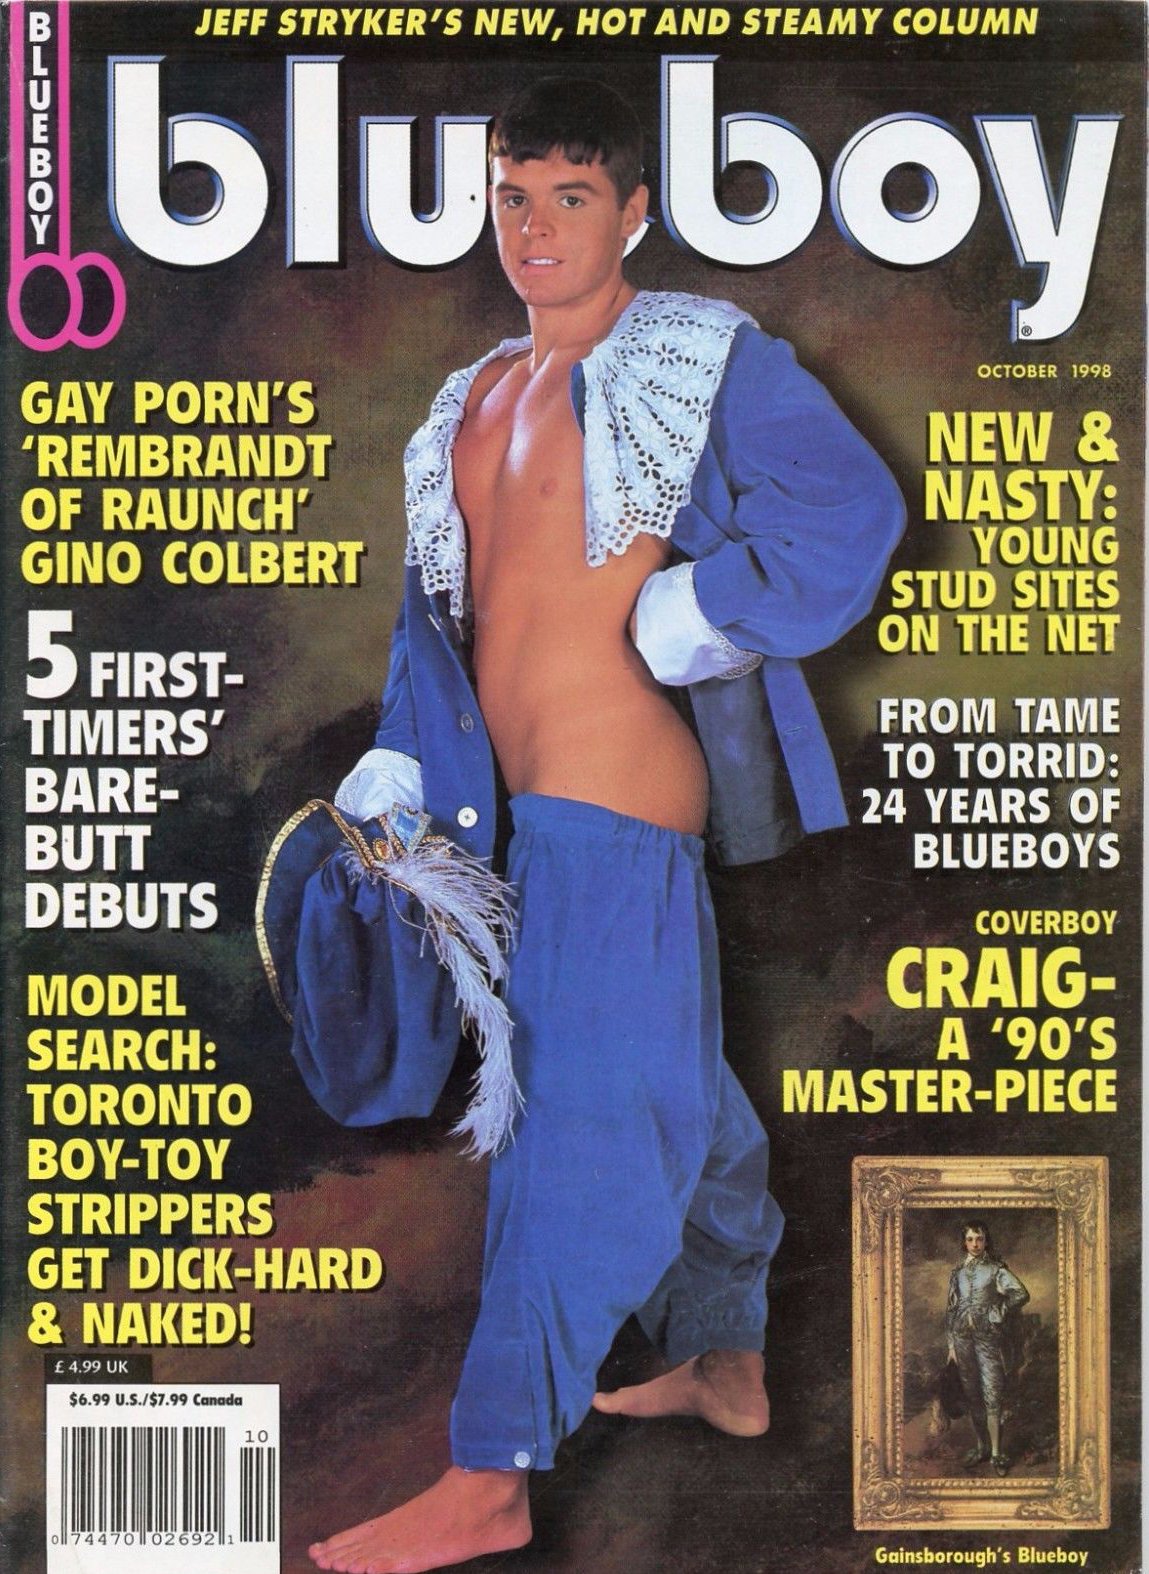 Blueboy October 1998 magazine back issue Blueboy magizine back copy Blueboy October 1998 Gay Mens Magazine Back Issue Publishing Photos of Naked Men. Gay Porn's Rembrandt Of Raunch' Gino Colbert.